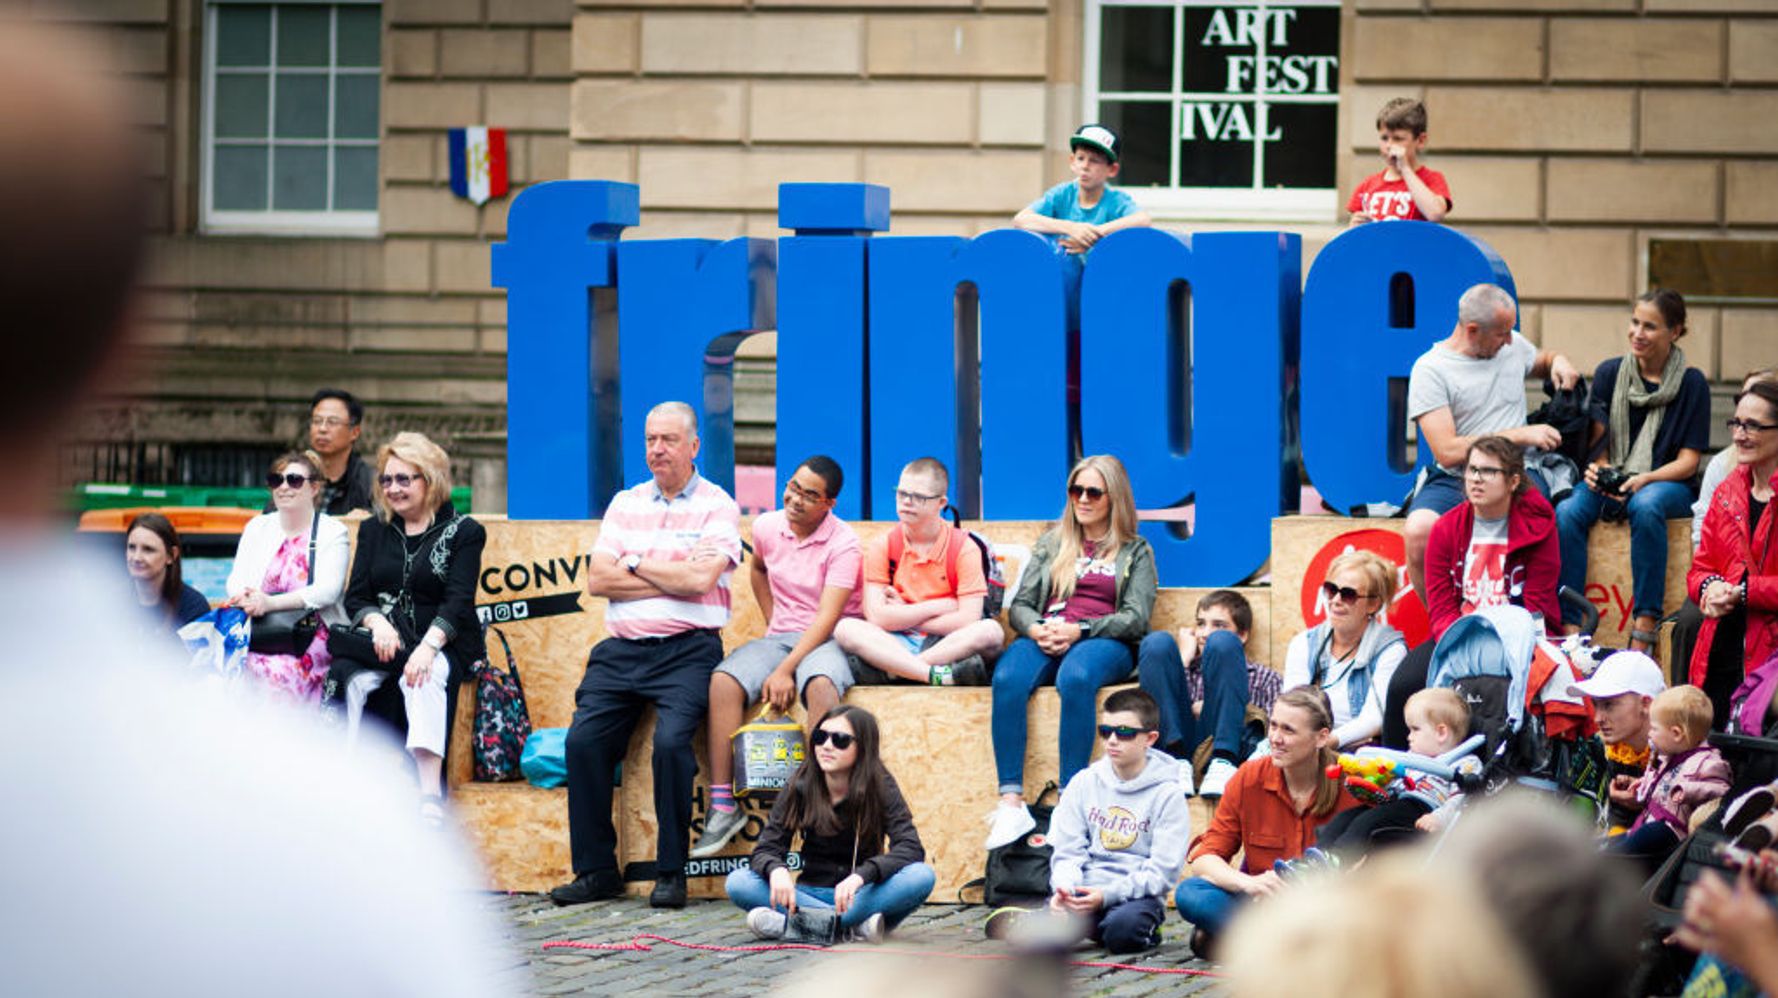 An Anti-Abortion Team Is Staging A Play At This Year’s Edinburgh Fringe